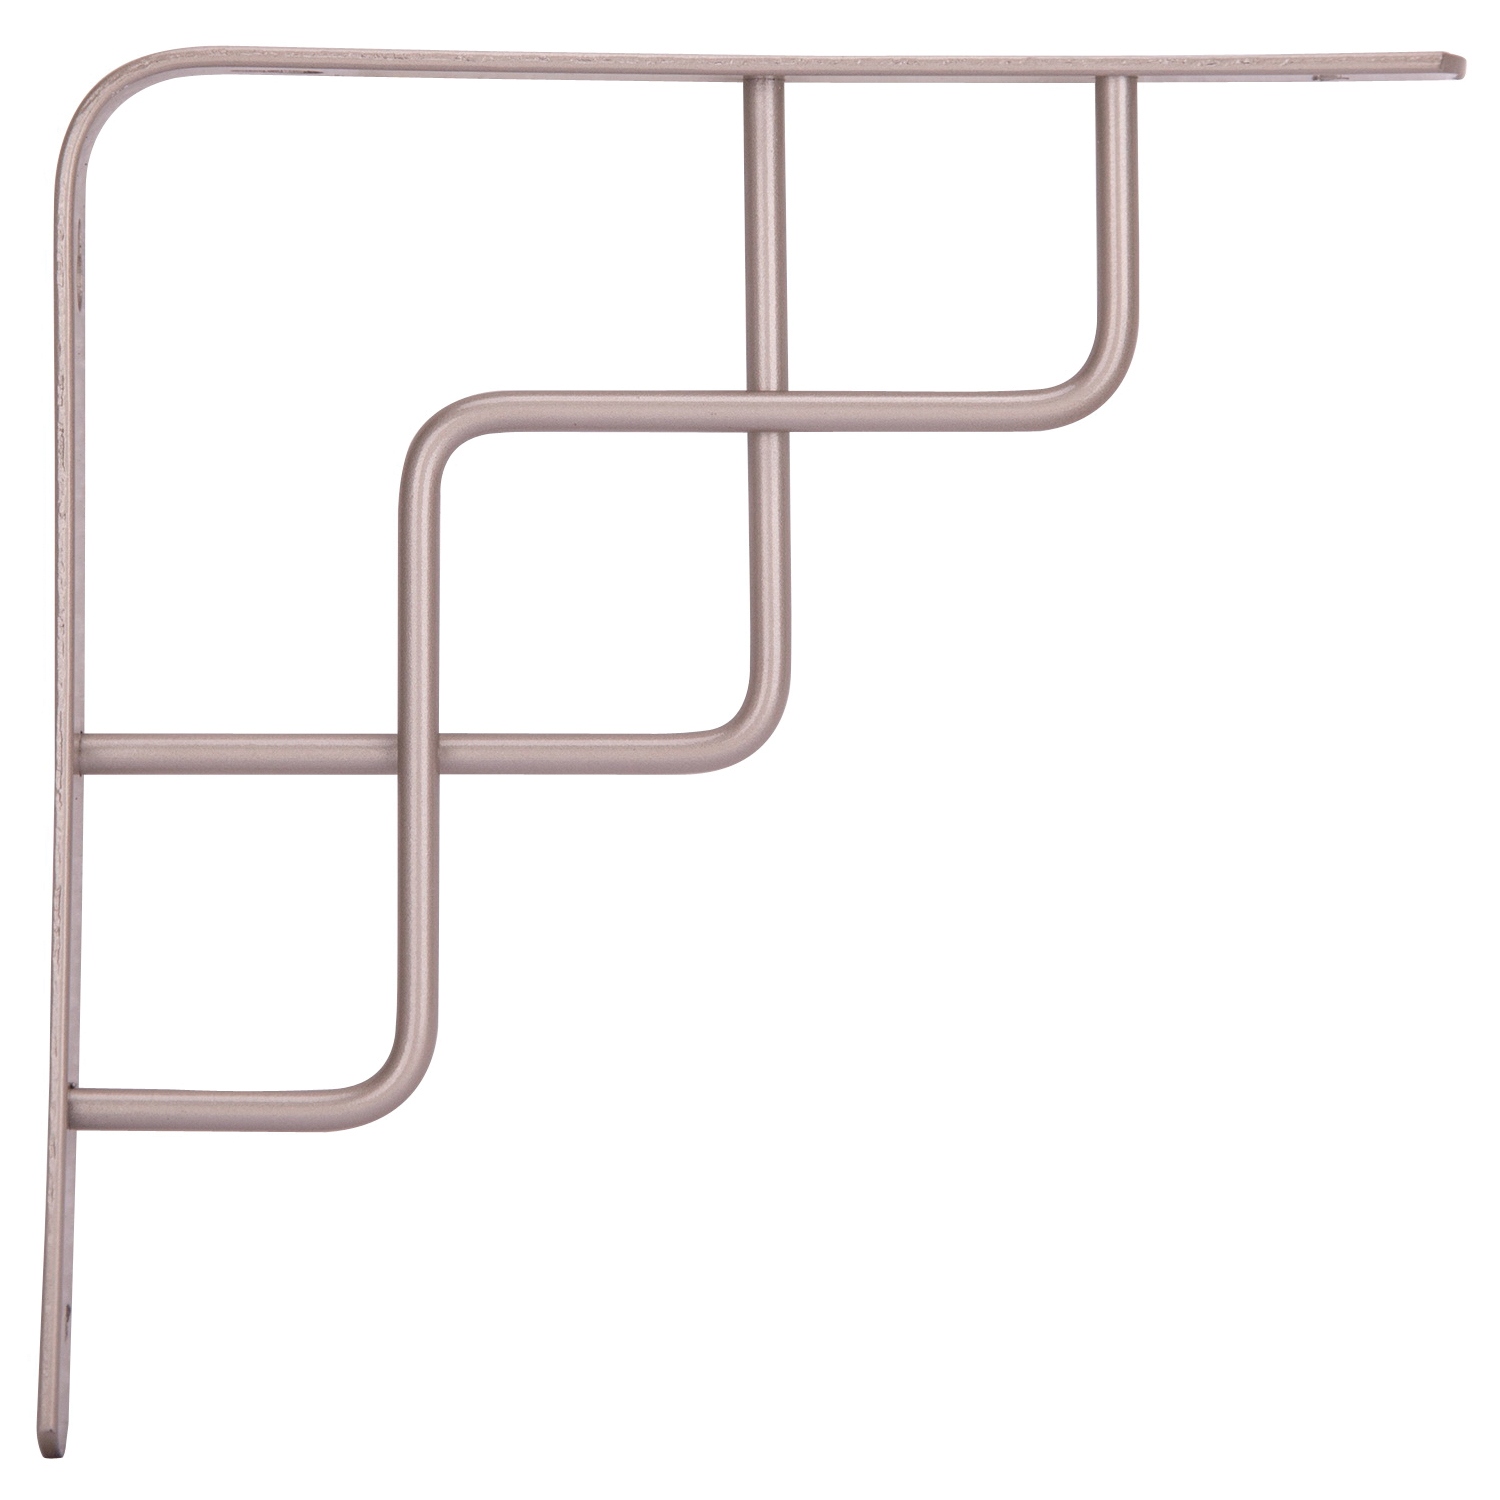 SB-035PS Contemporary and Decorative Shelf Bracket, 220 lb/Pair, 8 in L, 8 in H, Steel, Satin Nickel